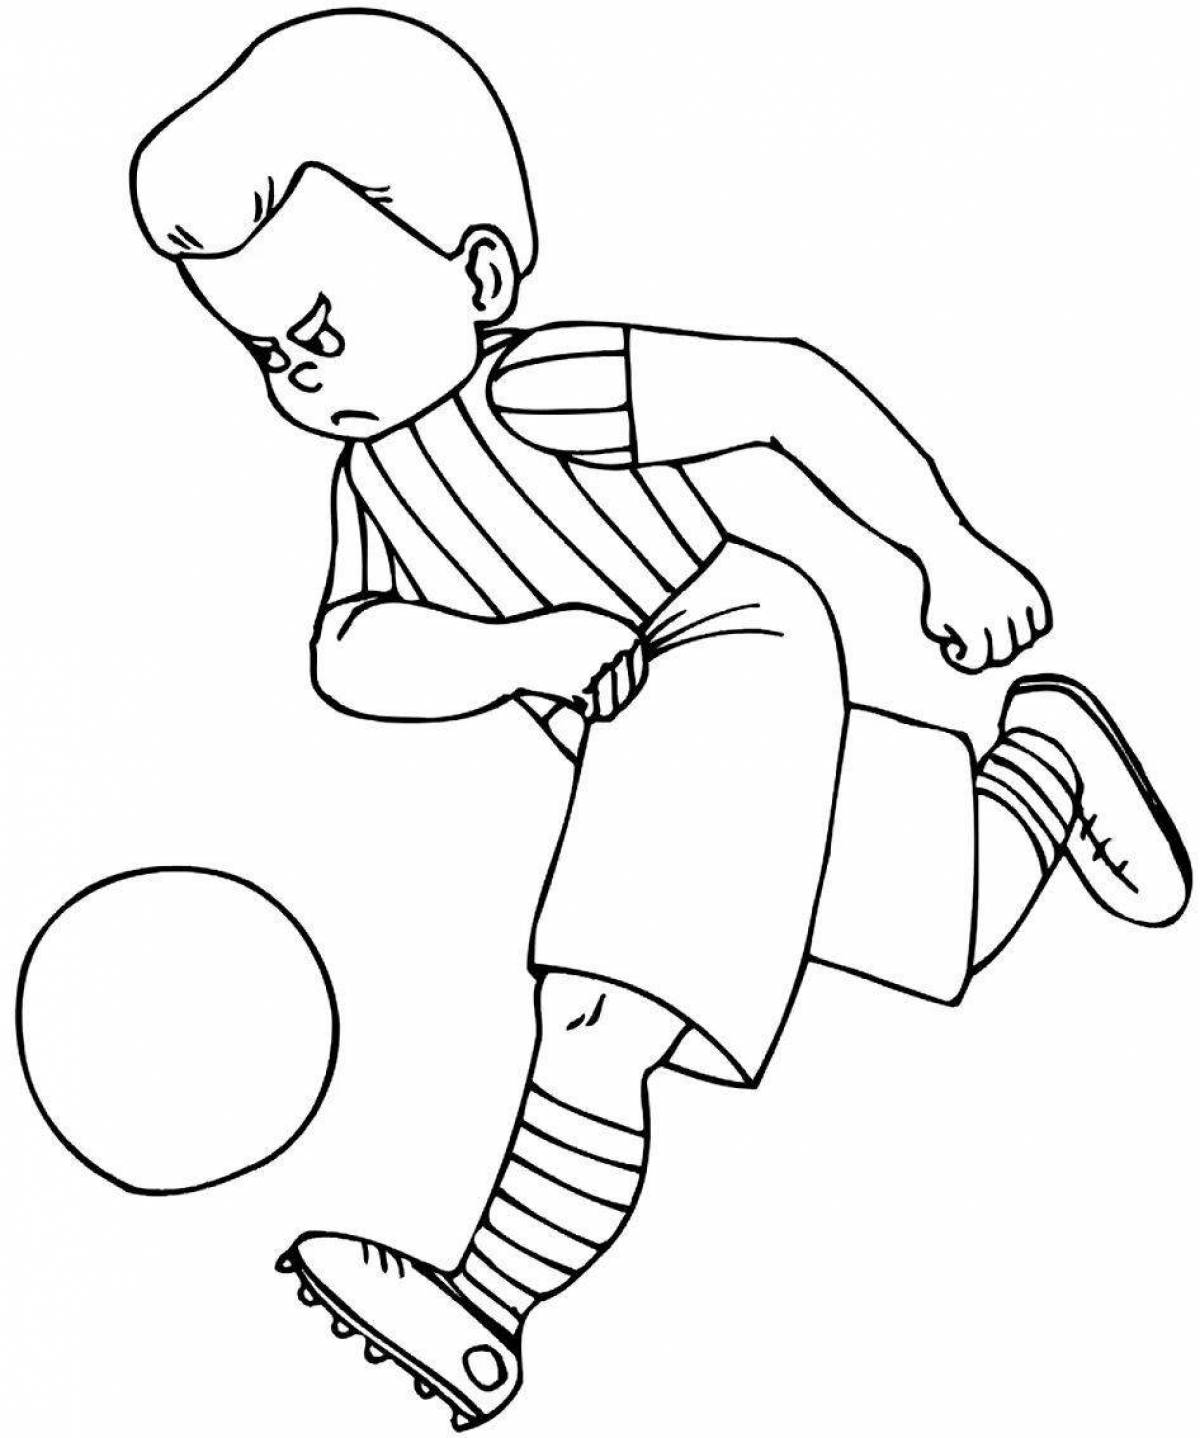 Coloring page running boy